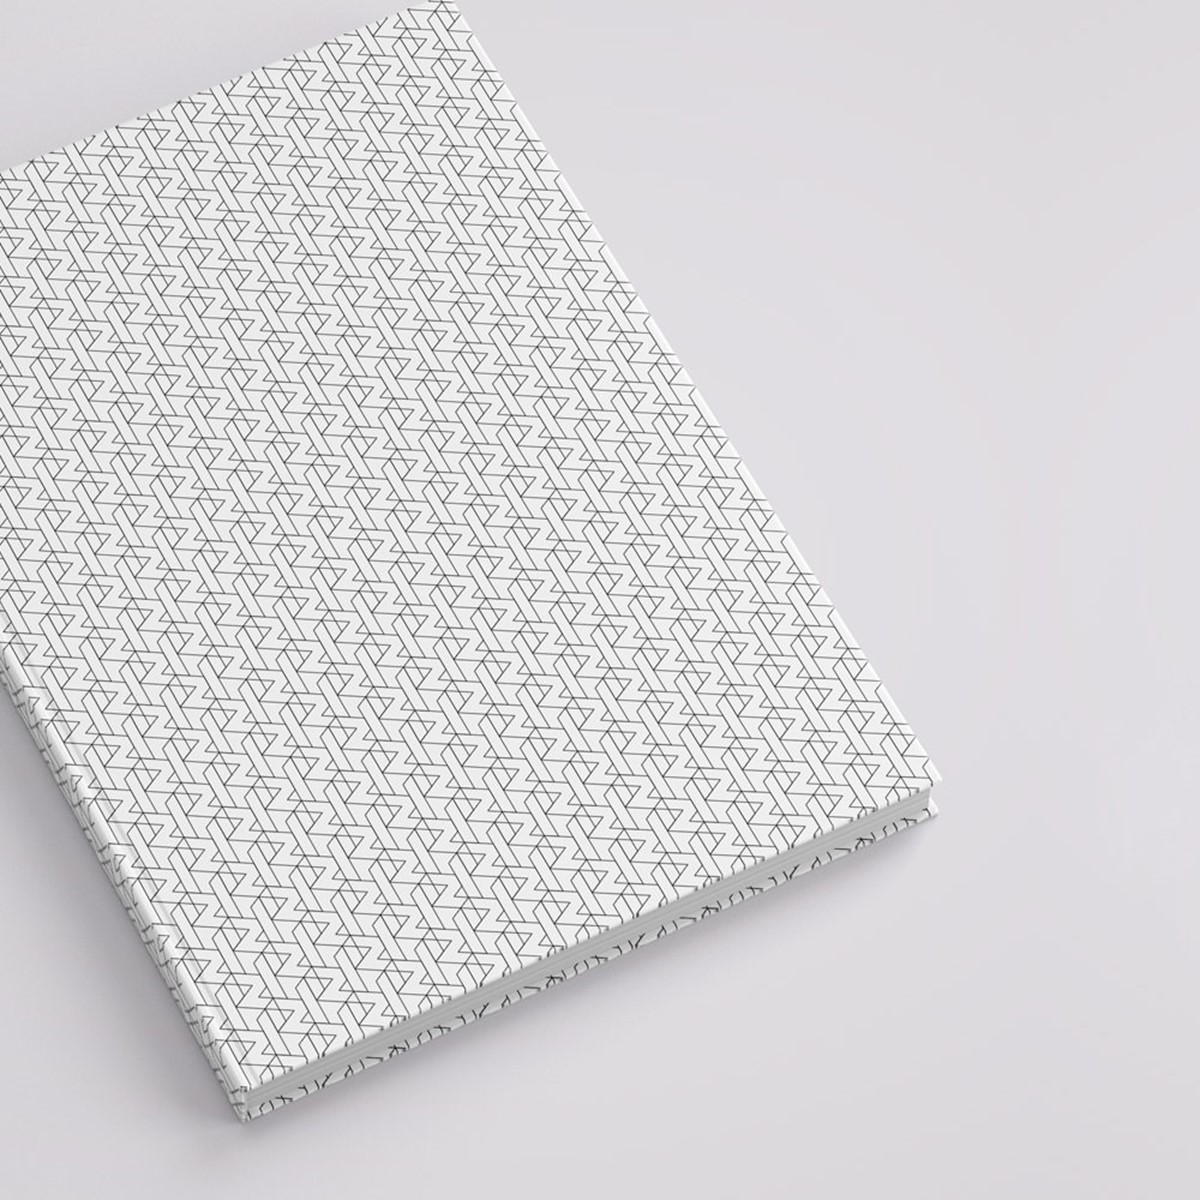 Revere. Geometric pattern book cover mock-up. Brand identity design by Superfried. Manchester.